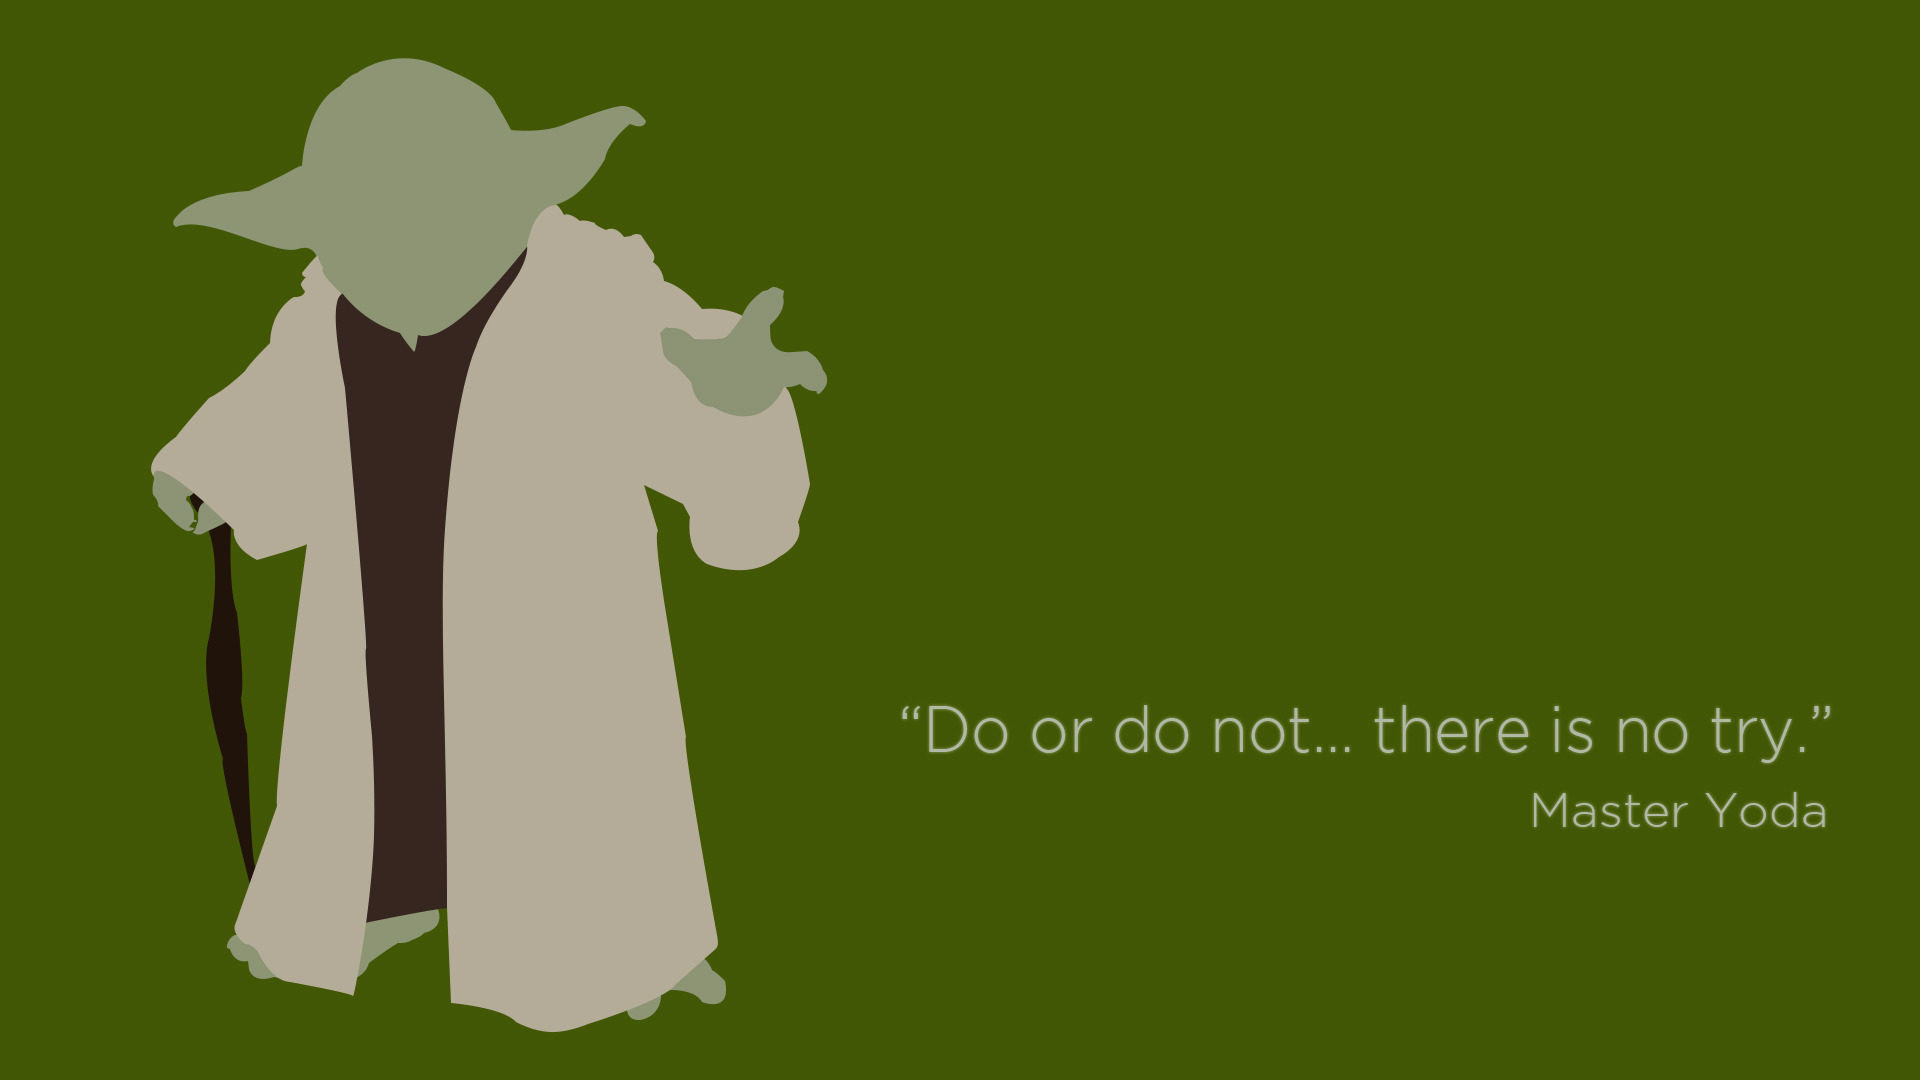 1920x1080 Yoda's Advice for Troubled Times